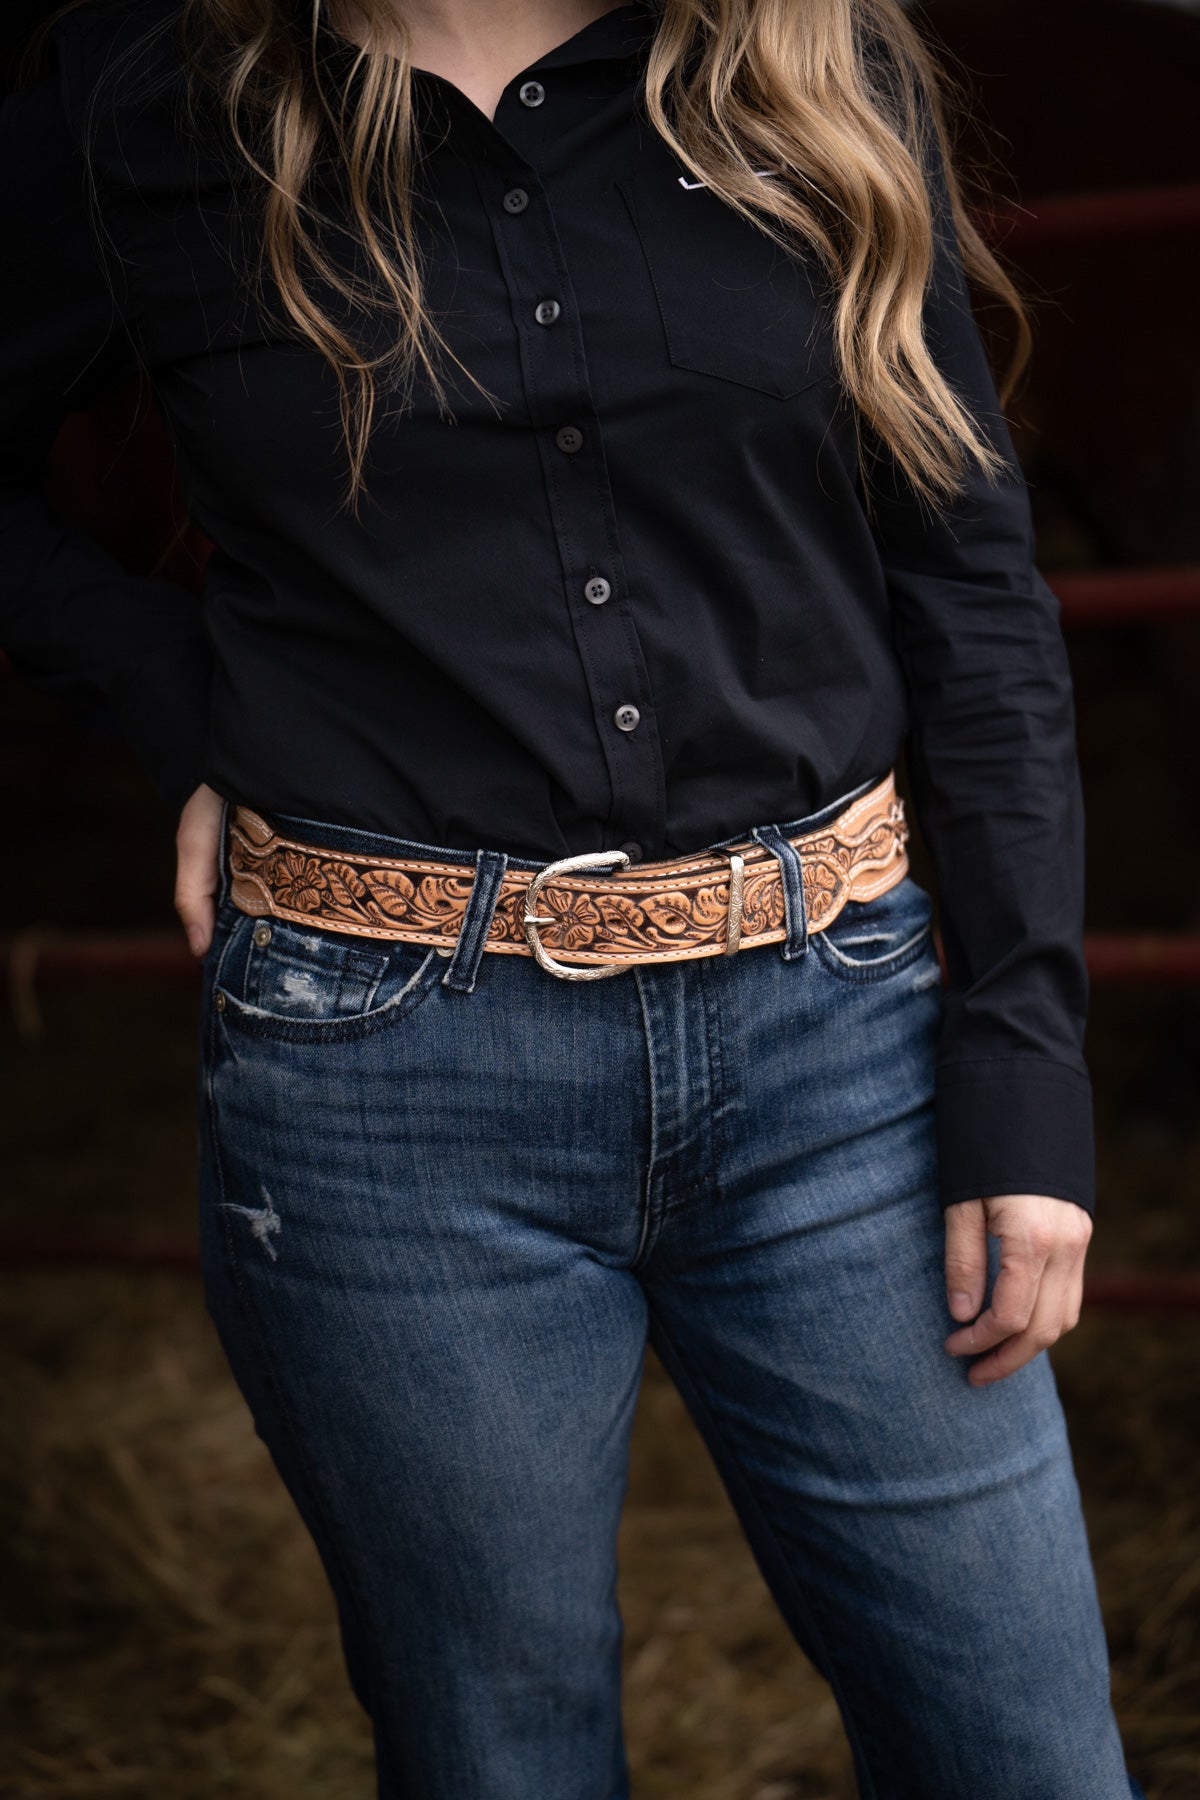 Rough Out Belt with Floral Tooled Billets by Double J Saddlery (1 7/8" tapered to 1 1/2")